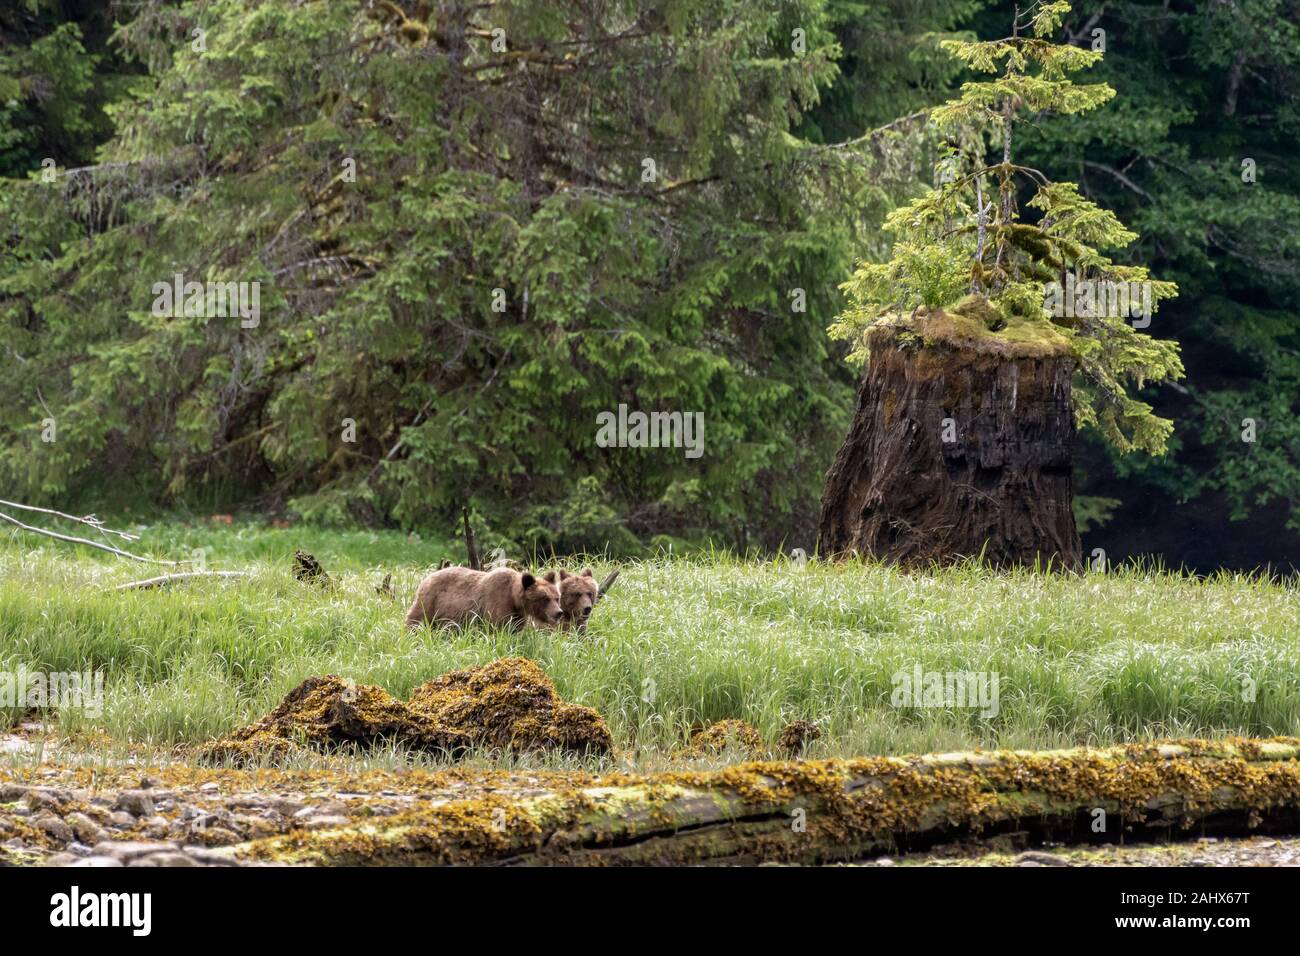 Young grizzly siblings in a sedge grass meadow at low tide, Khutzeymateen Grizzly Bear Sanctuary, British Columbia Stock Photo